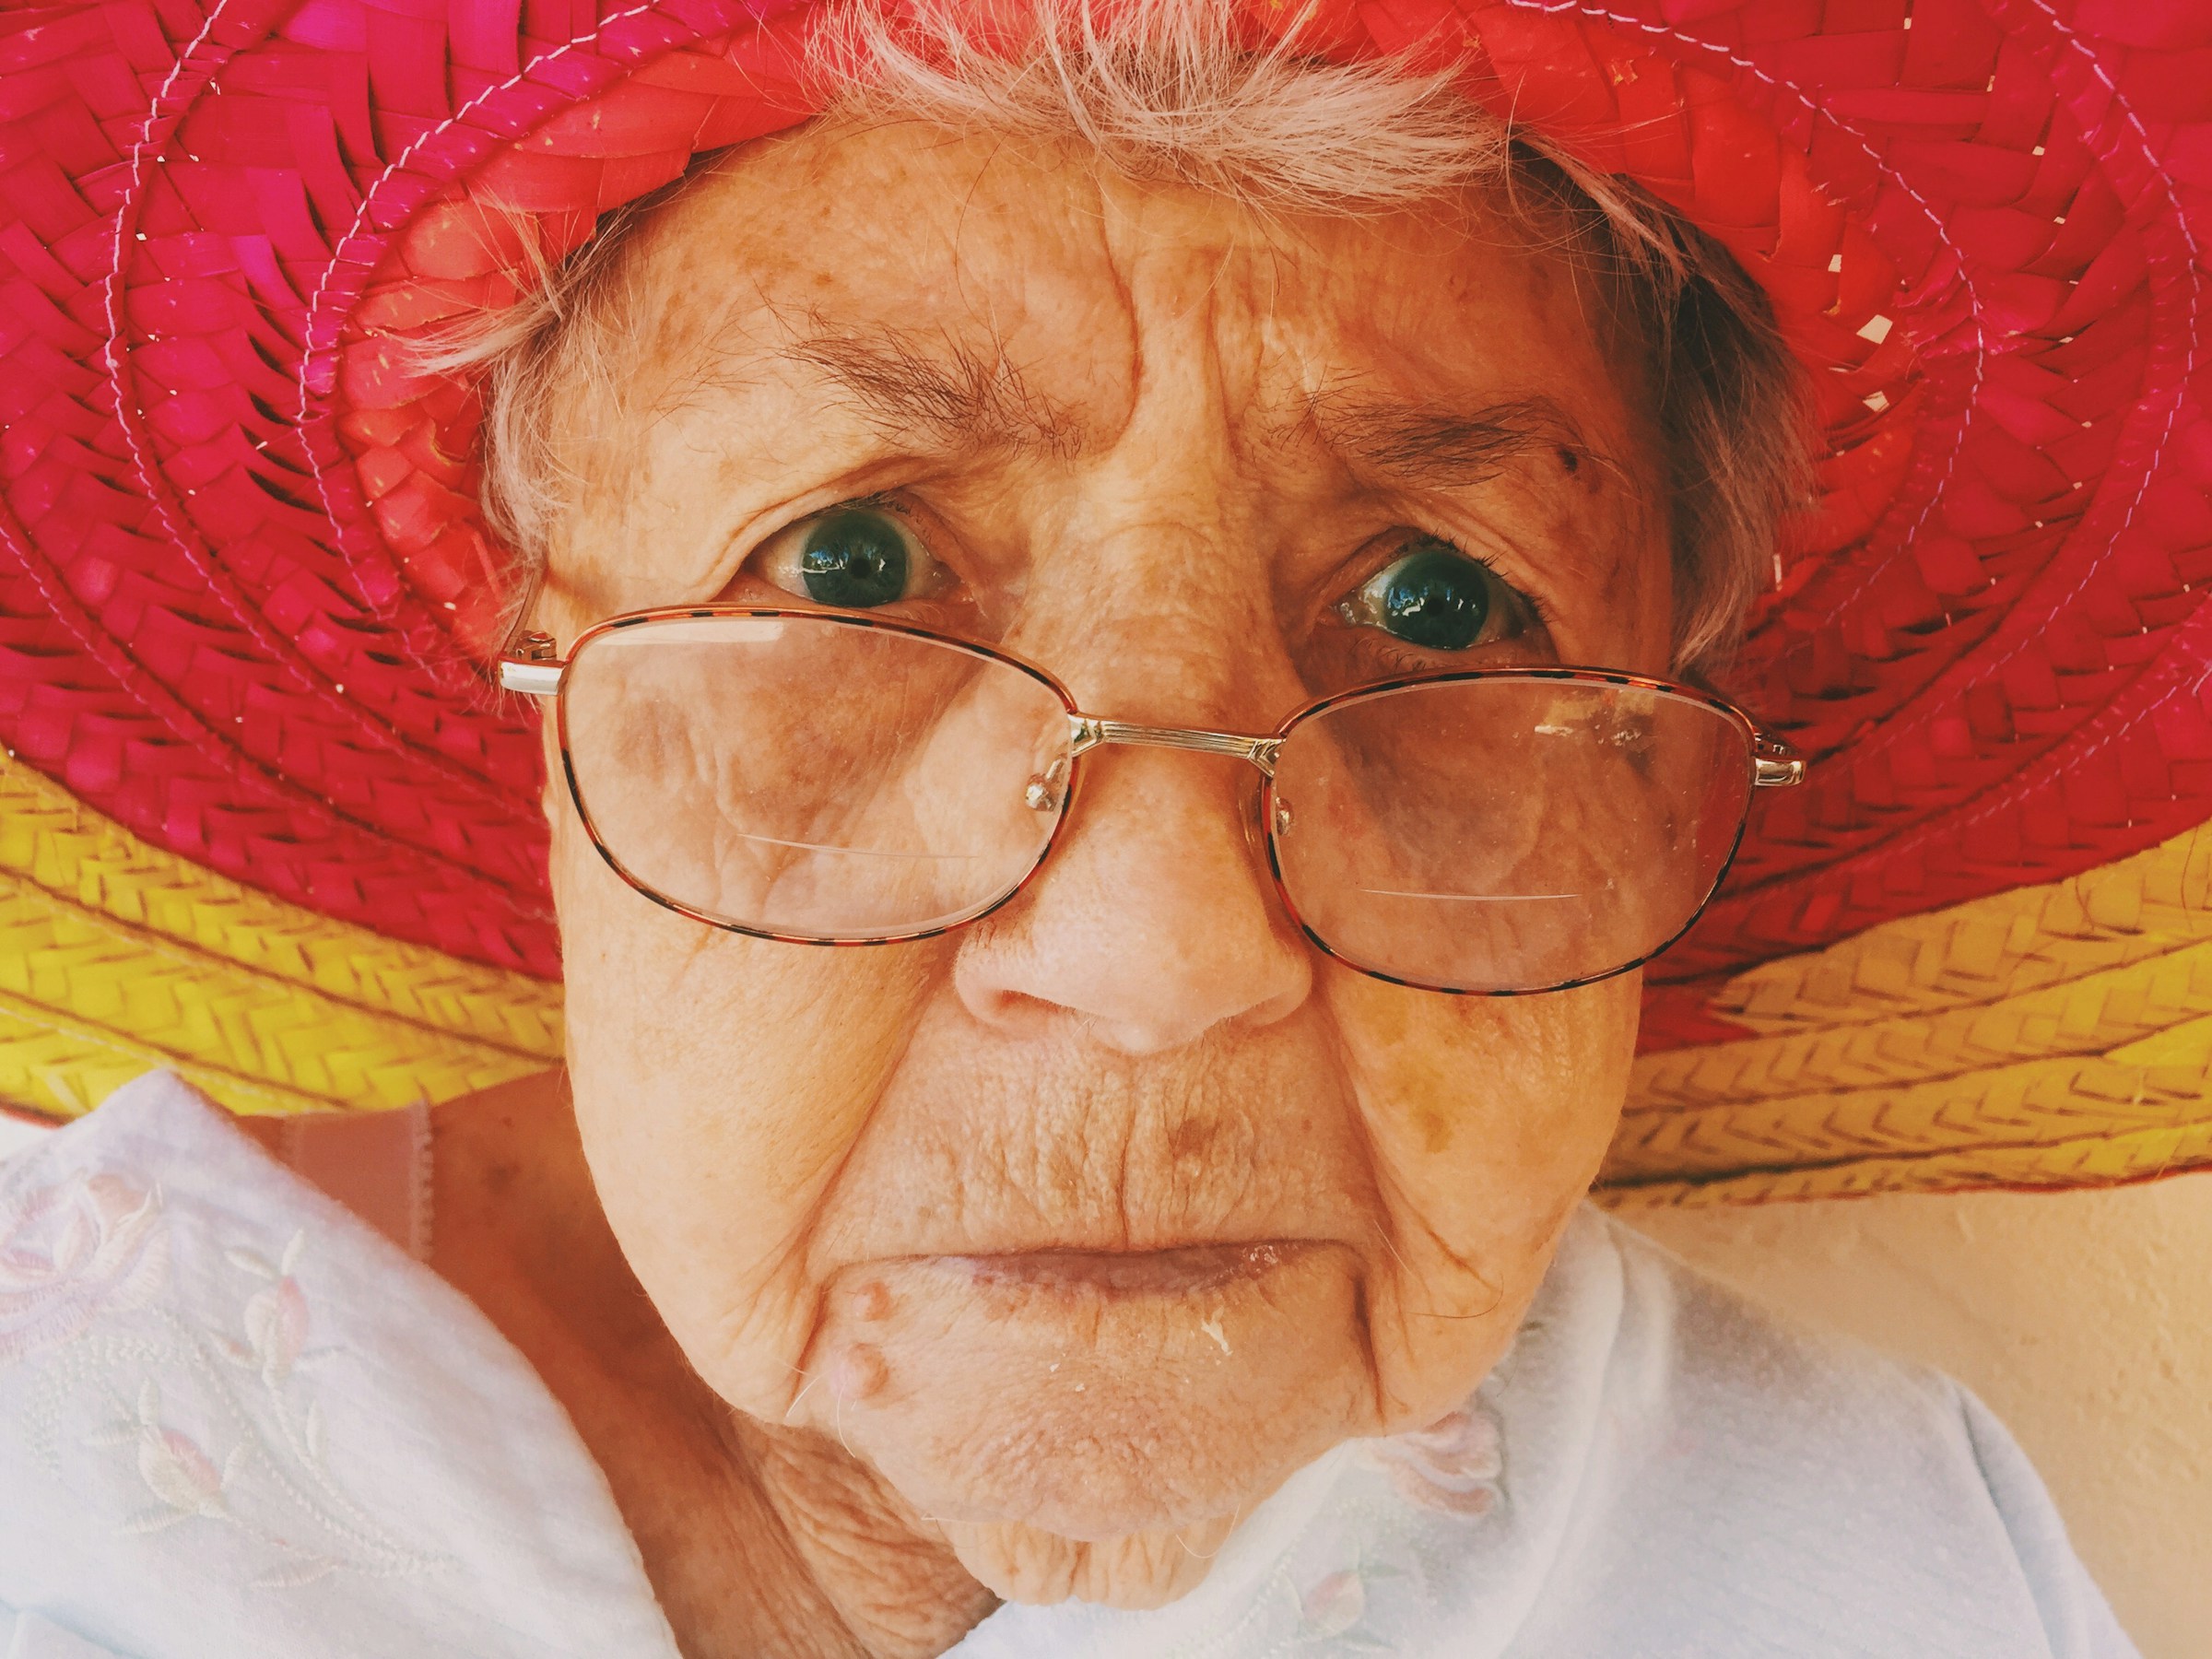 An elderly lady looking indifferent | Source: Unsplash